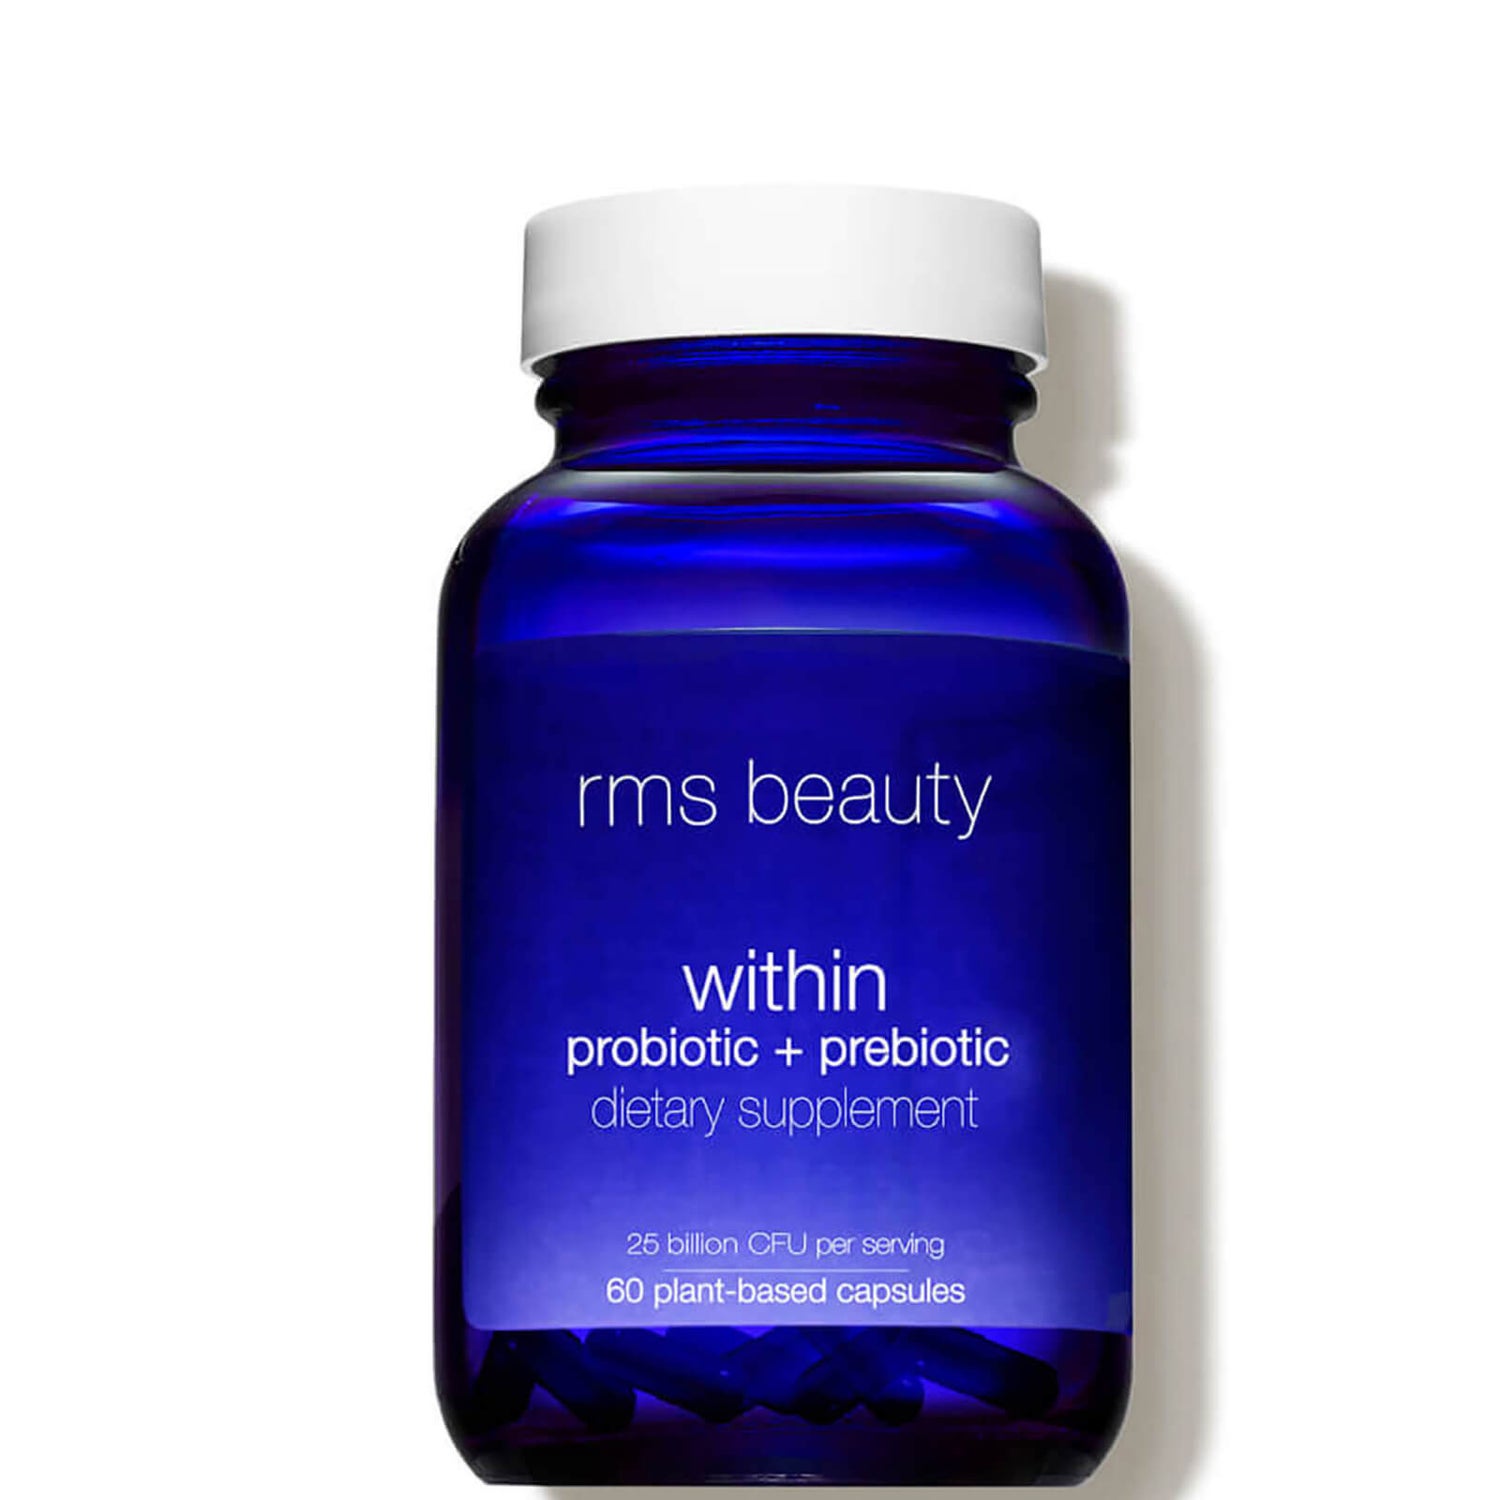 RMS Beauty Within Probiotic Prebiotic (60 capsules)